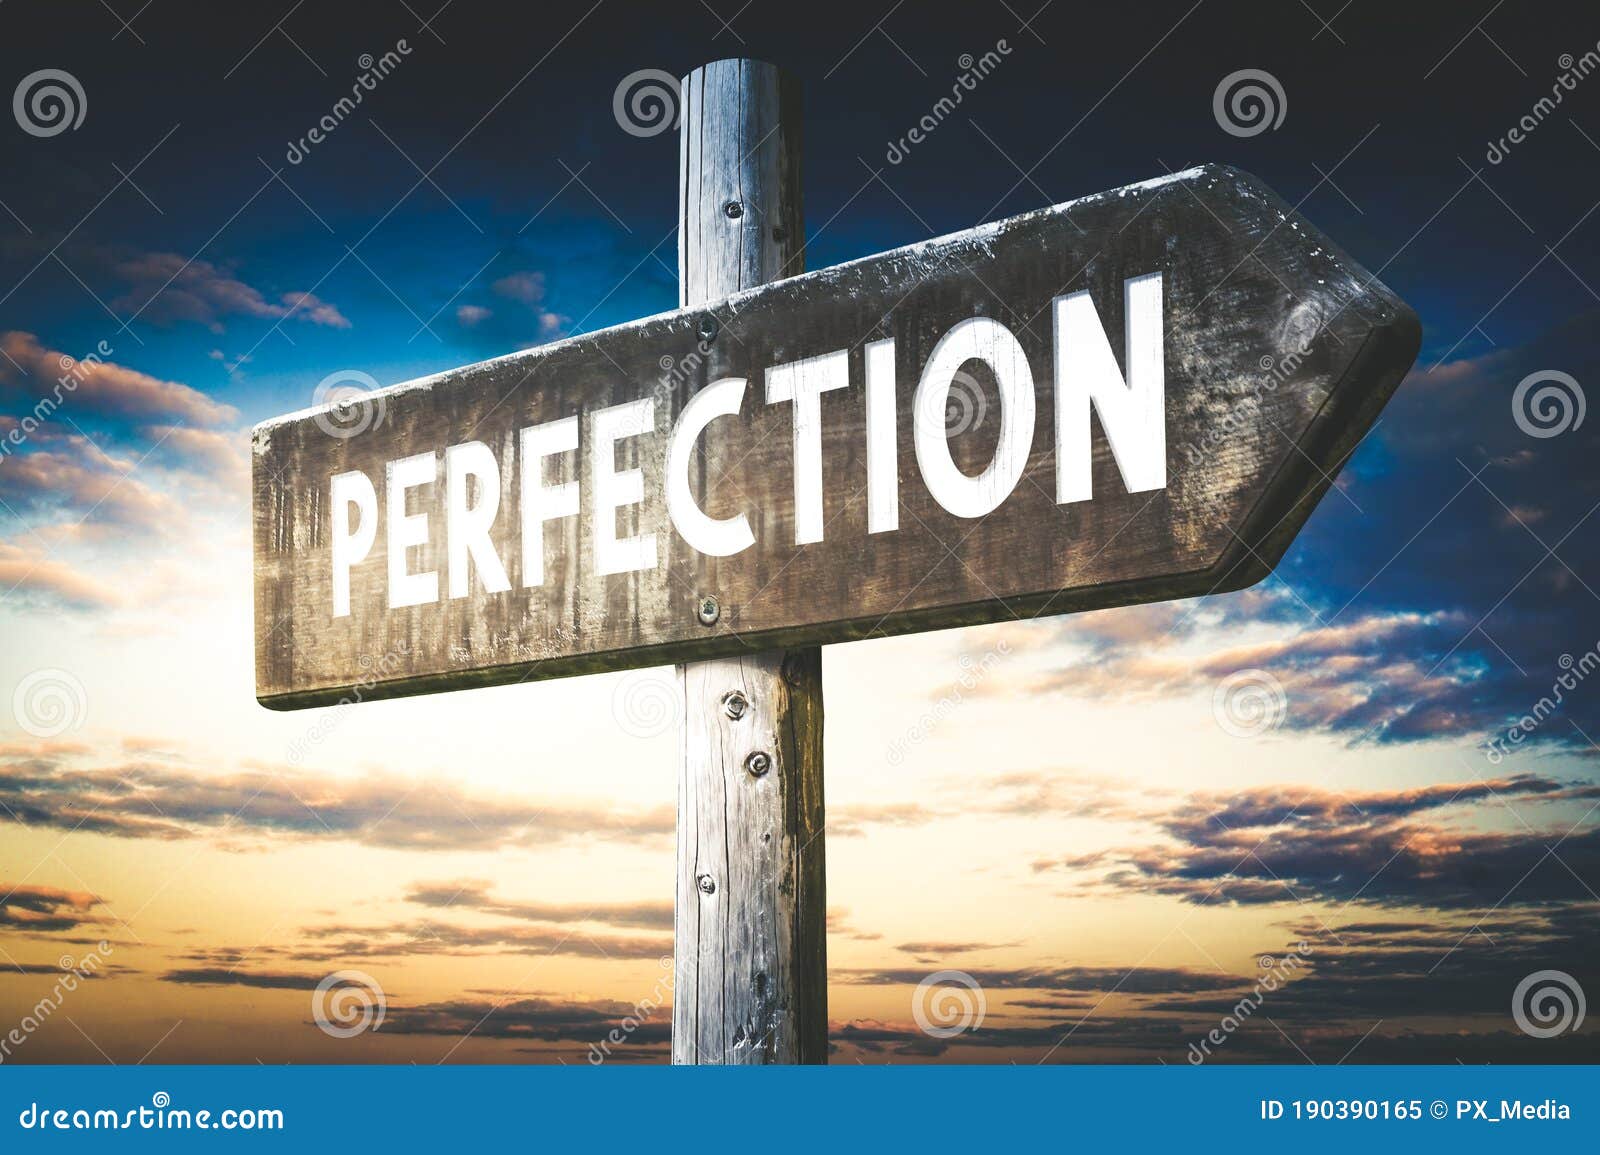 perfection - wooden signpost, roadsign with one arrow